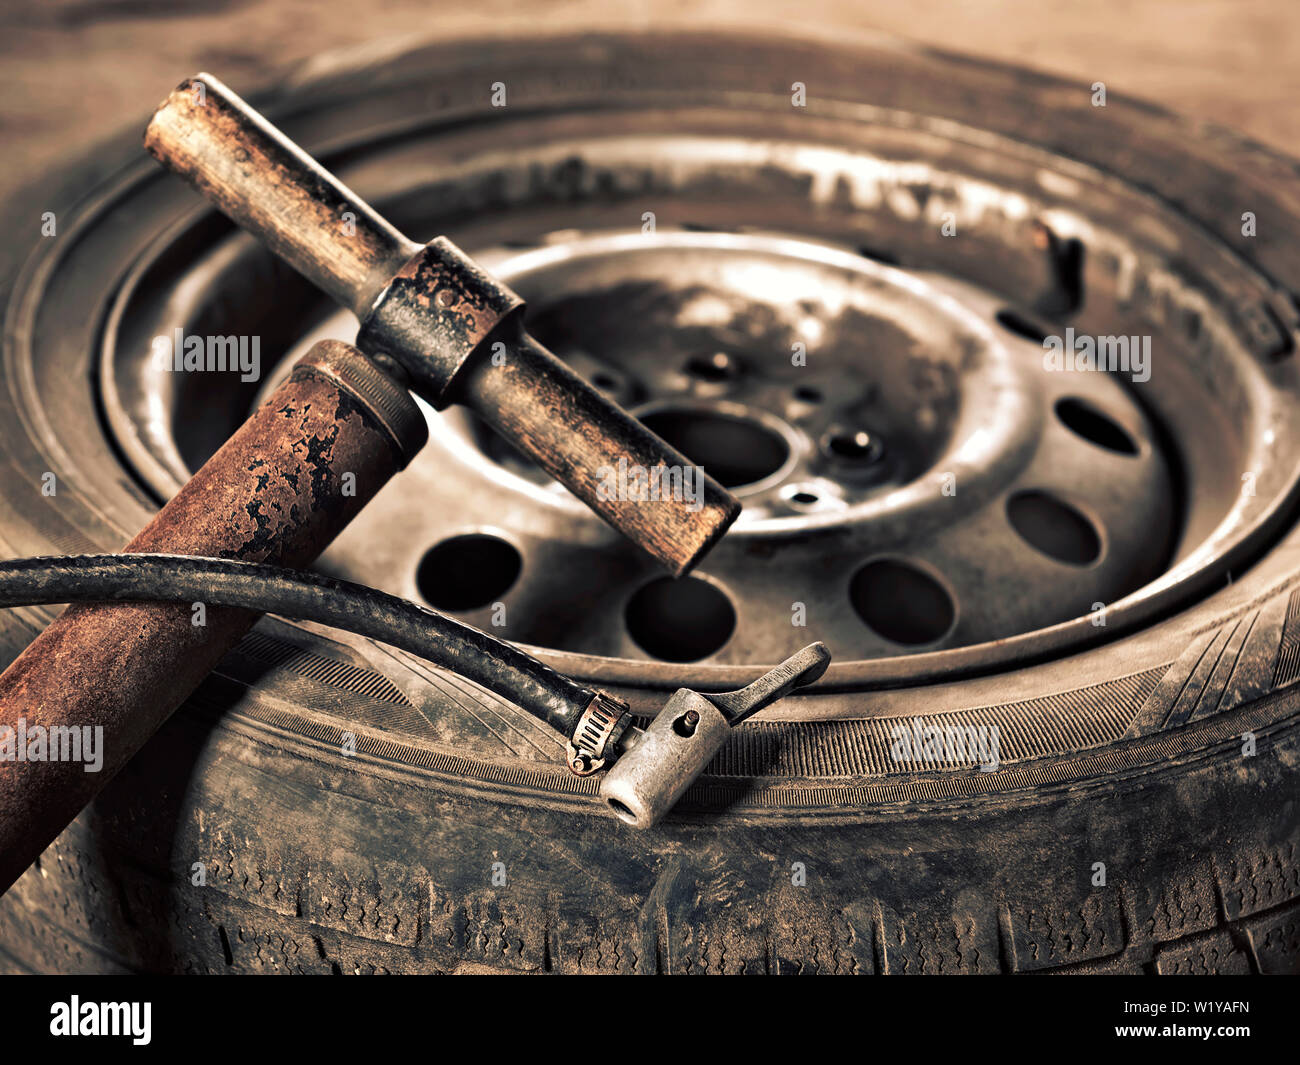 old hand-pump and car wheel close-up Stock Photo